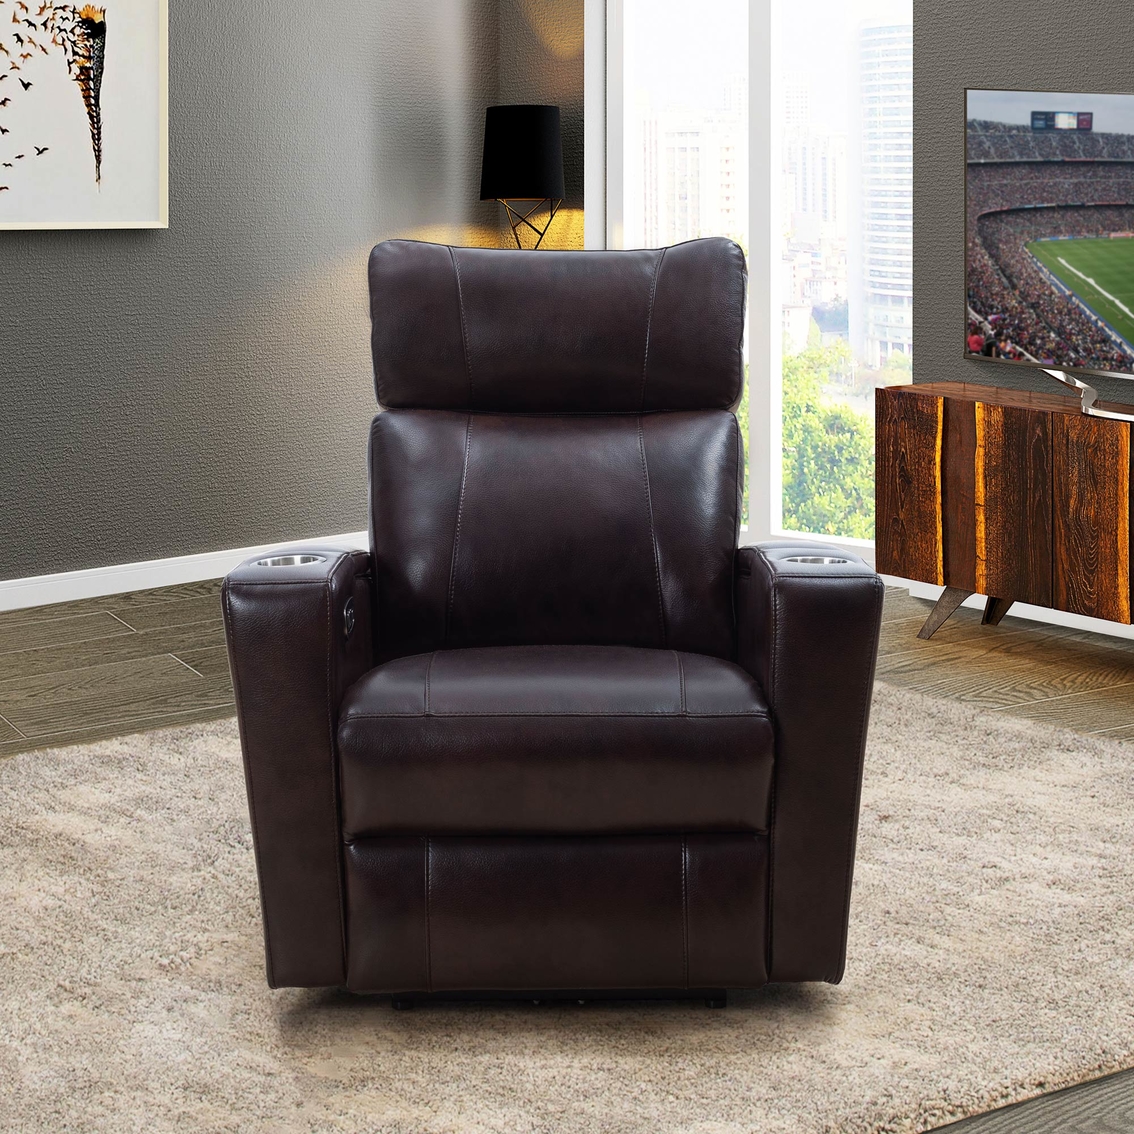 Abbyson Chayne Power Theatre Recliner, Brown - Image 3 of 4